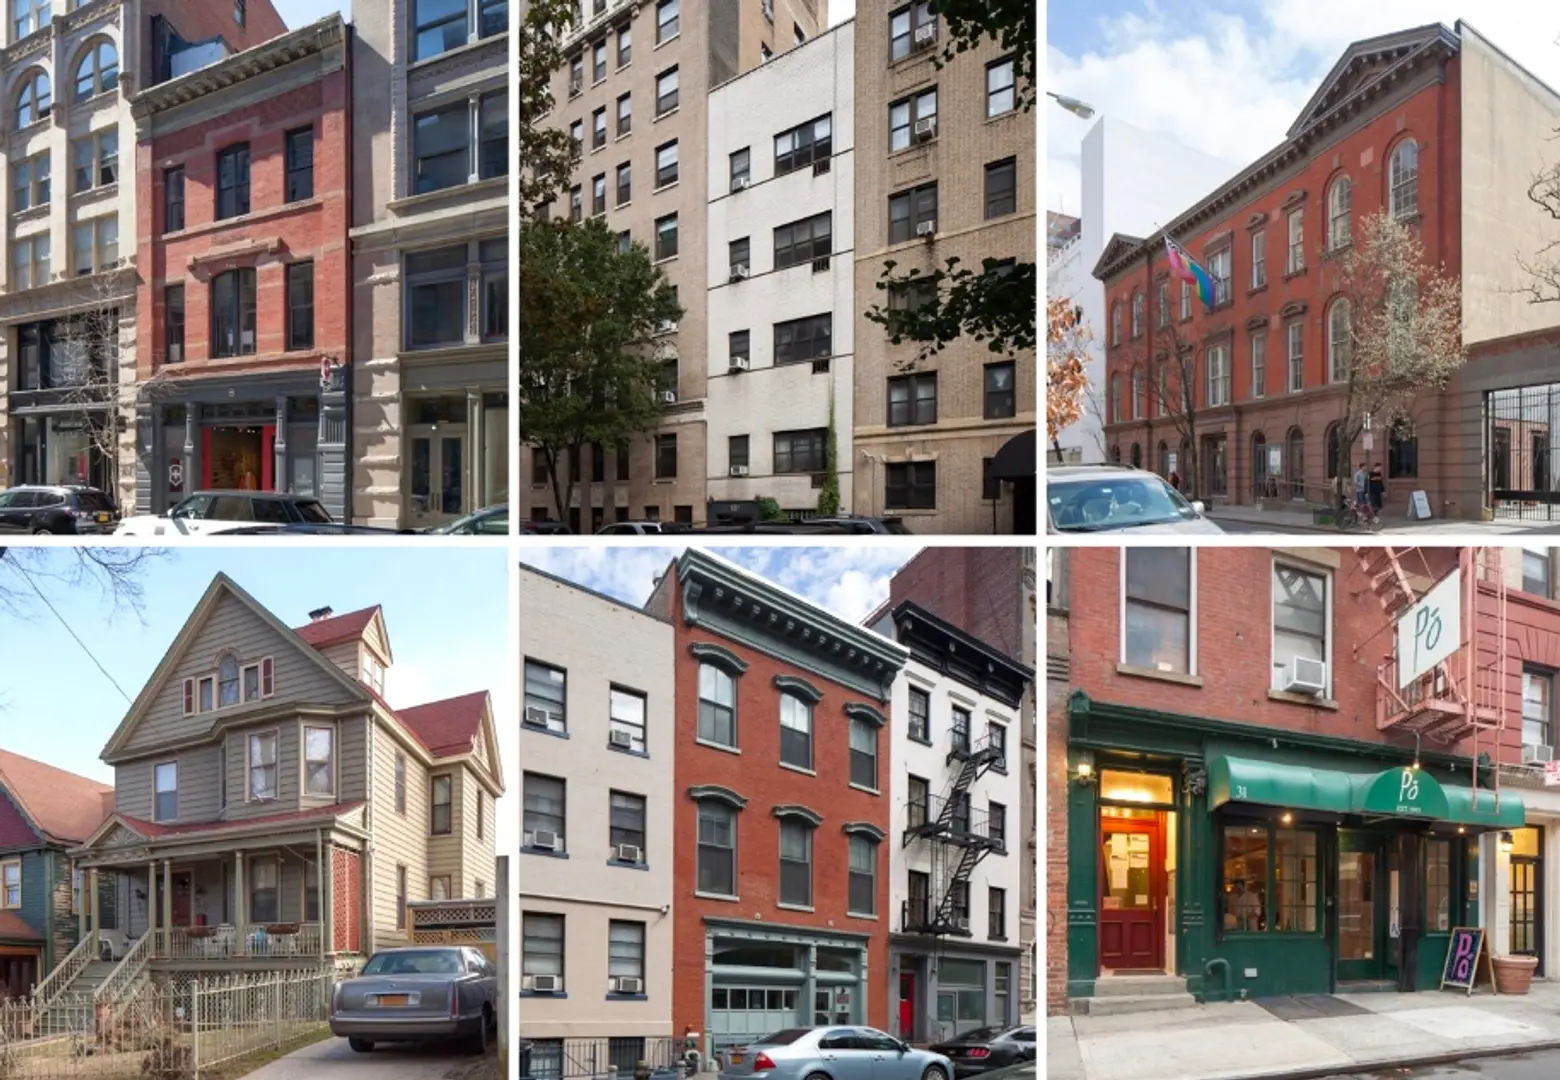 Six significant LGBTQ sites in New York City are landmarked